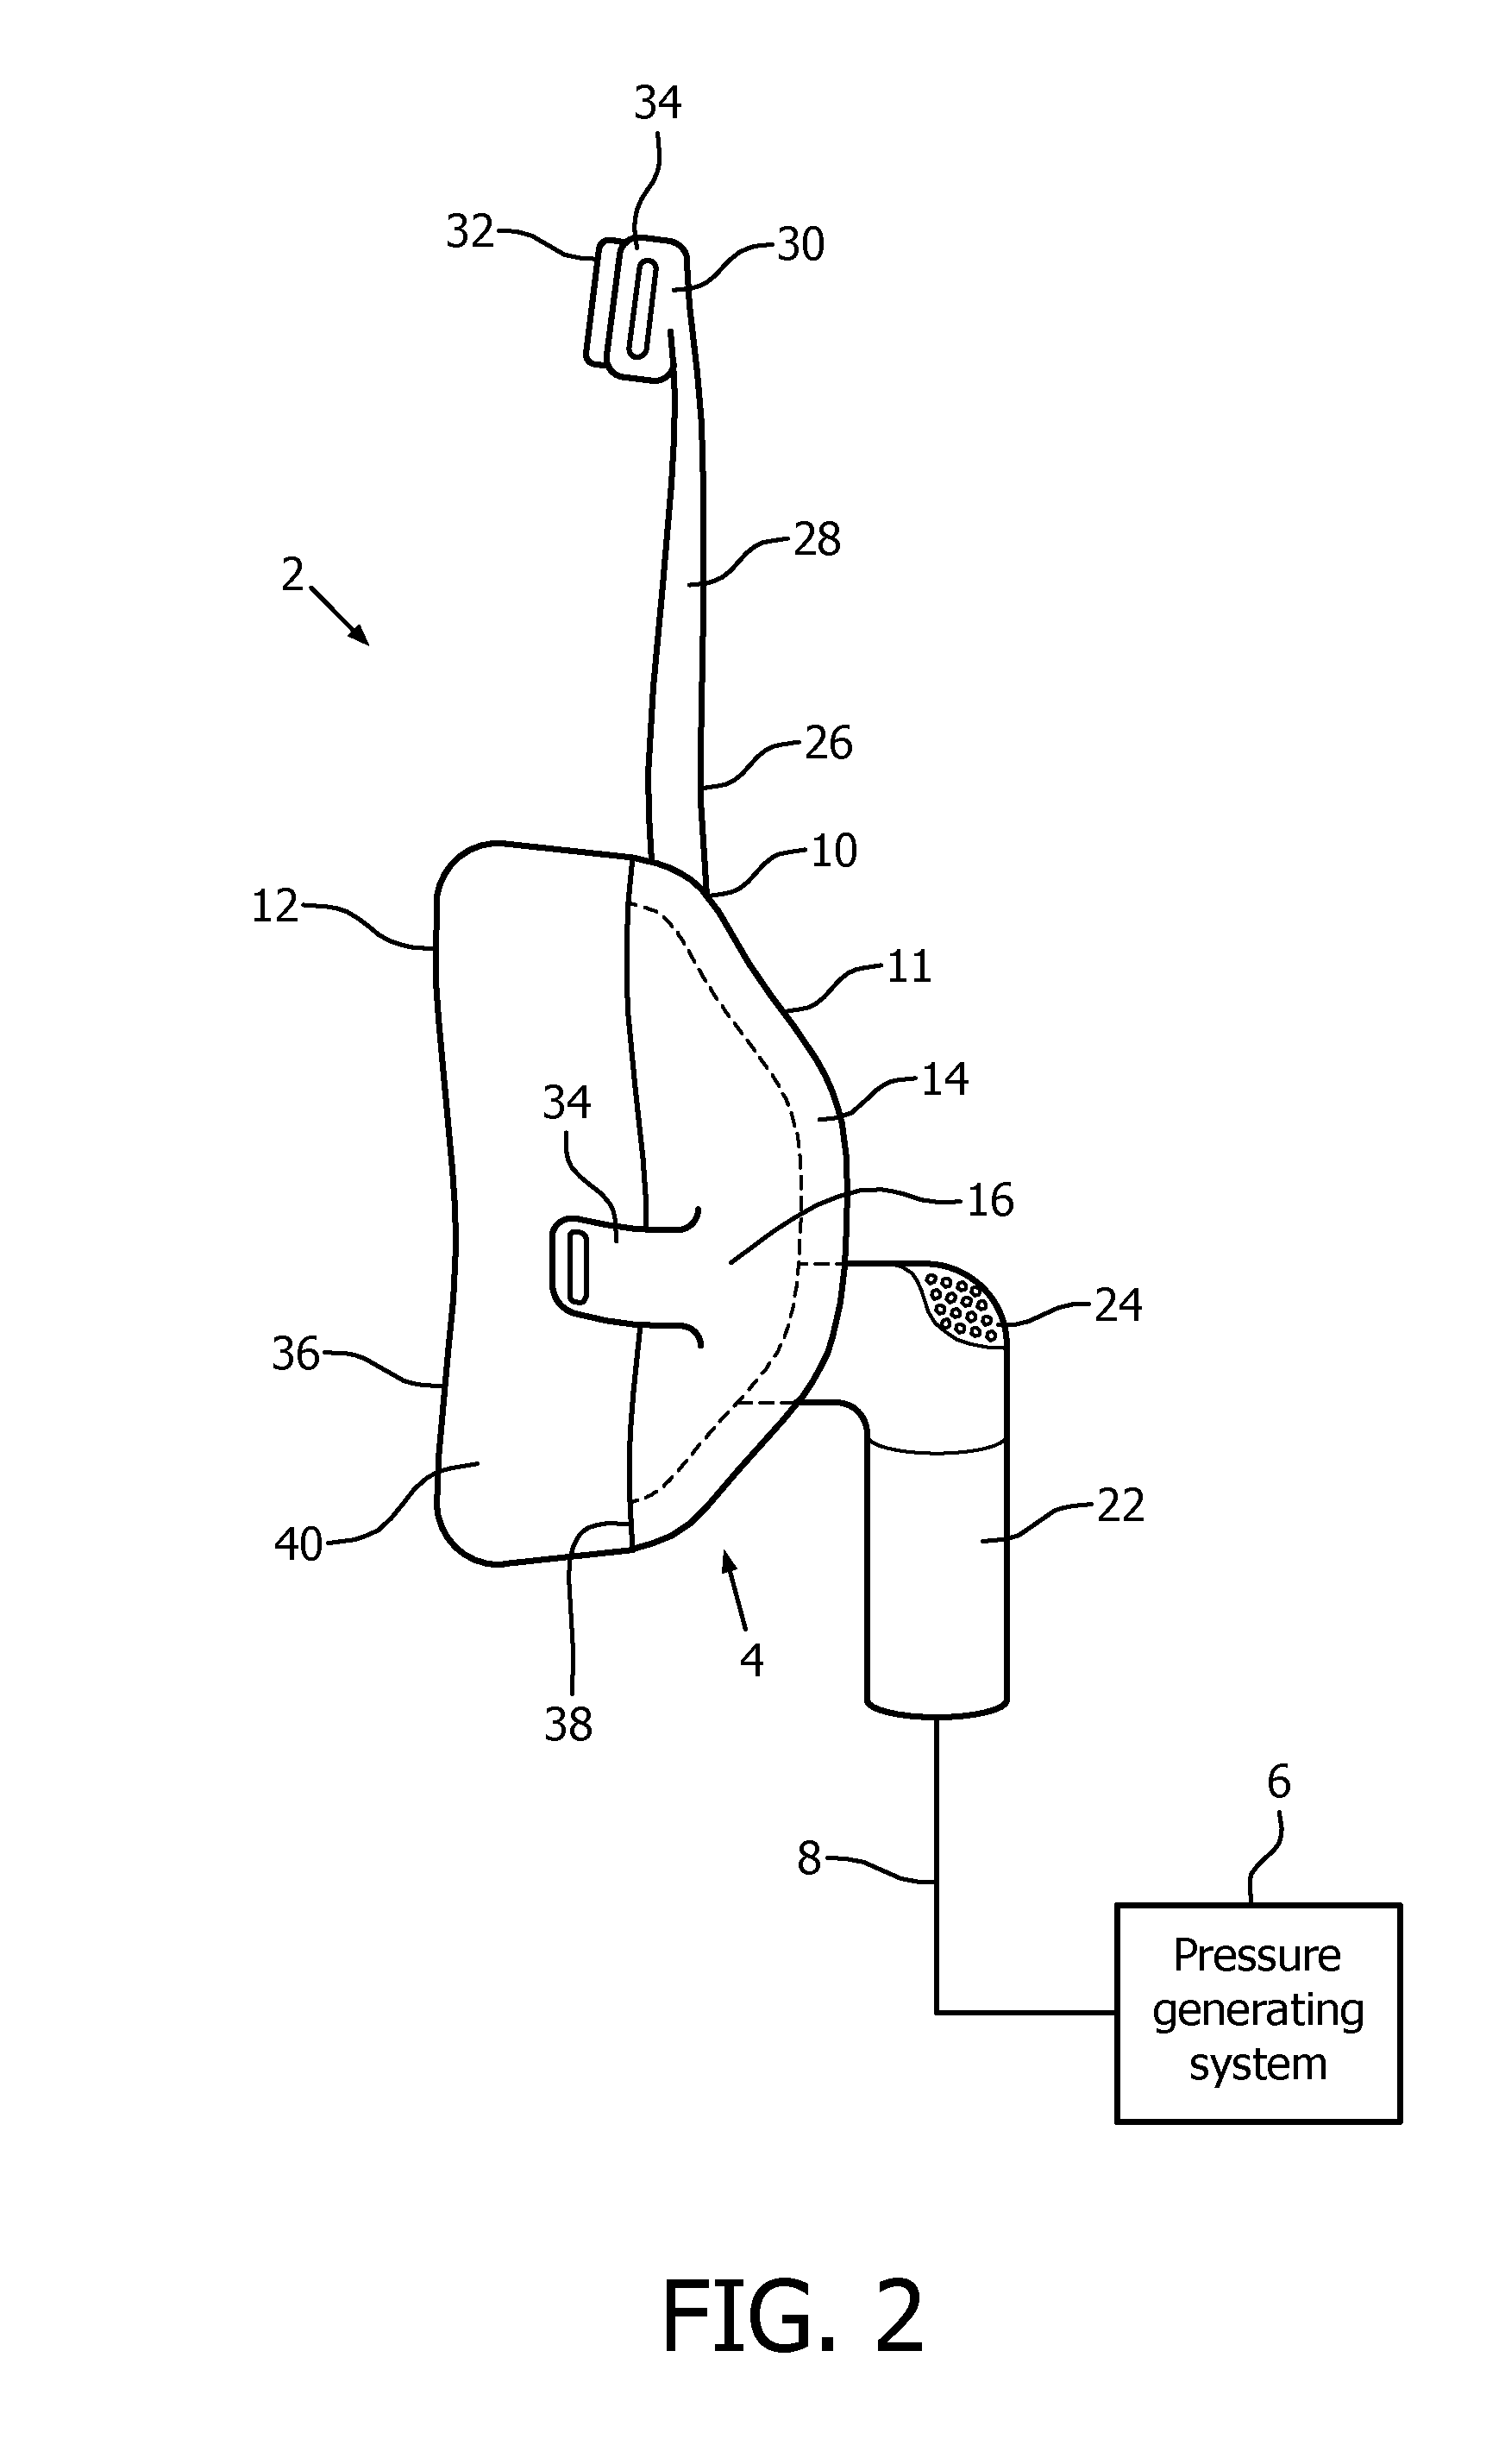 User interface device providing for improved cooling of the skin